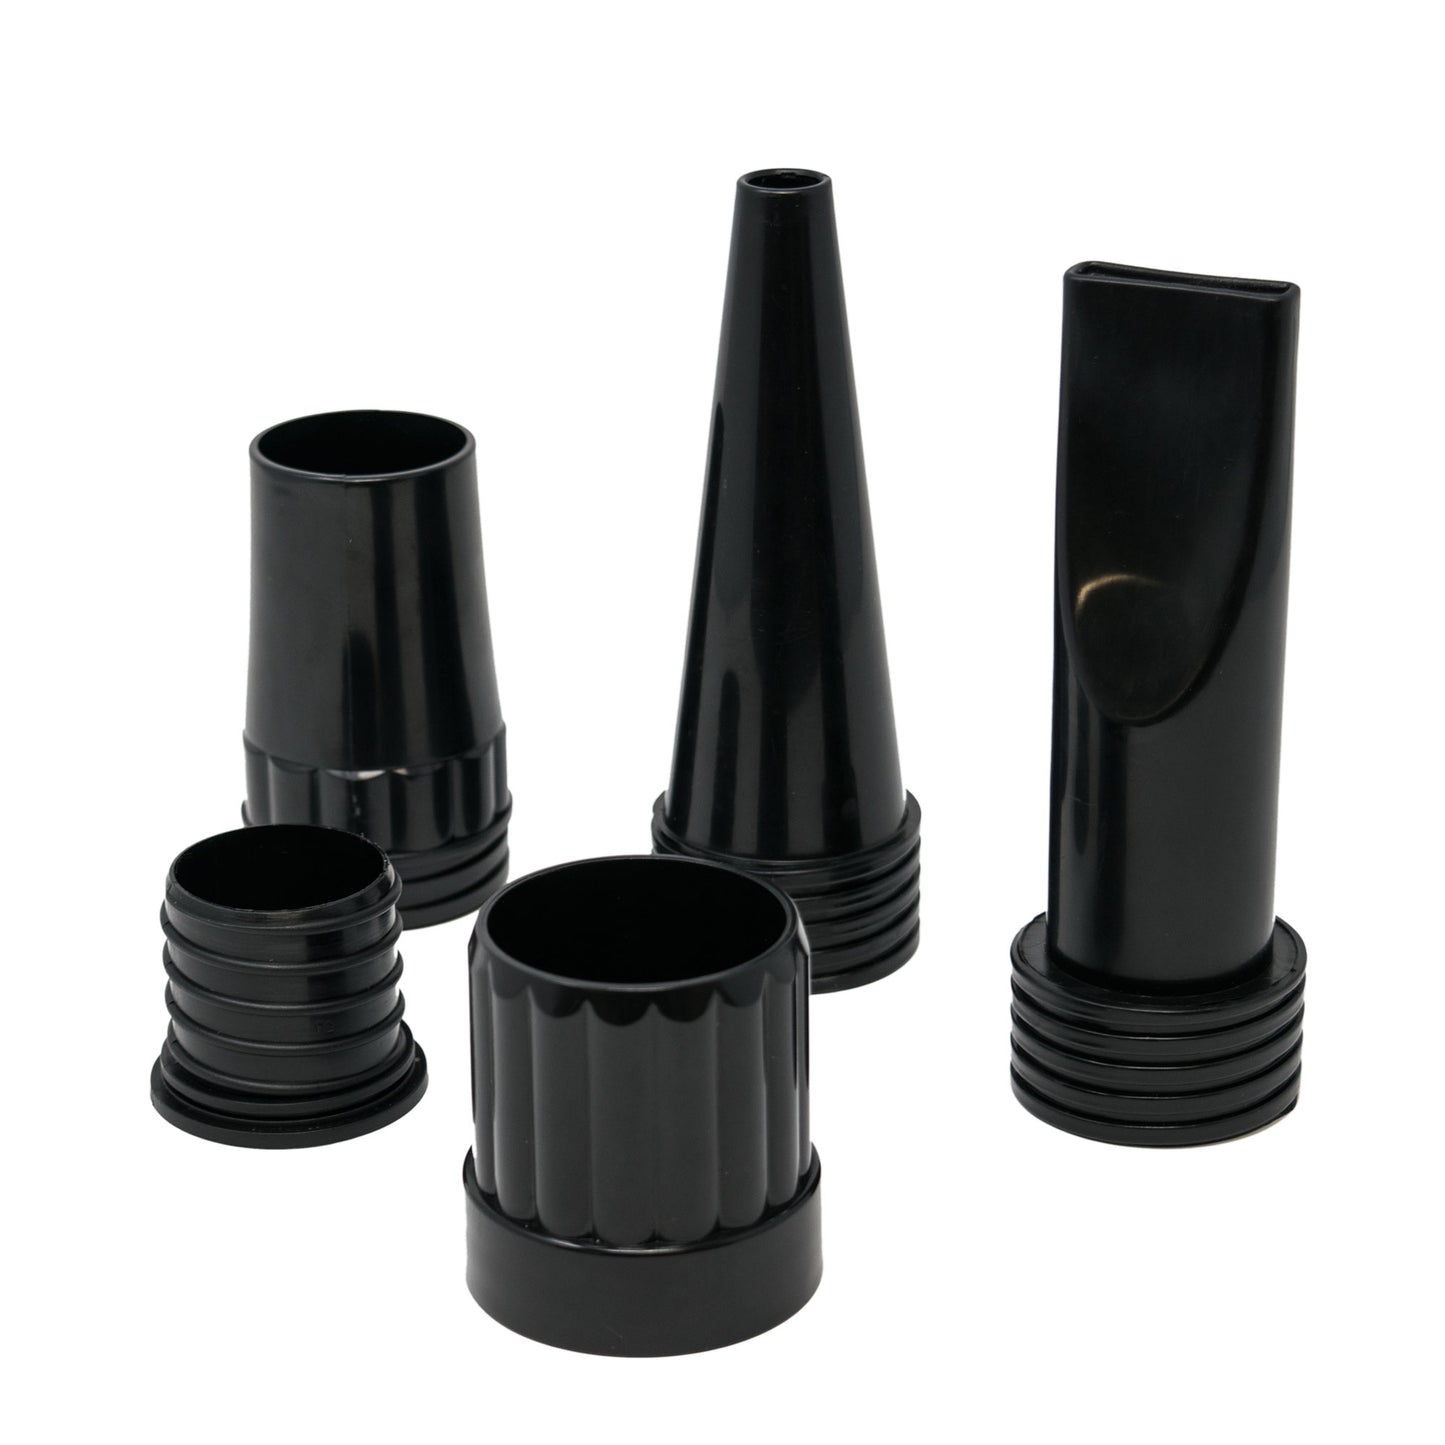 Screw-On Nozzles for Force Dryers (5-Piece Set)